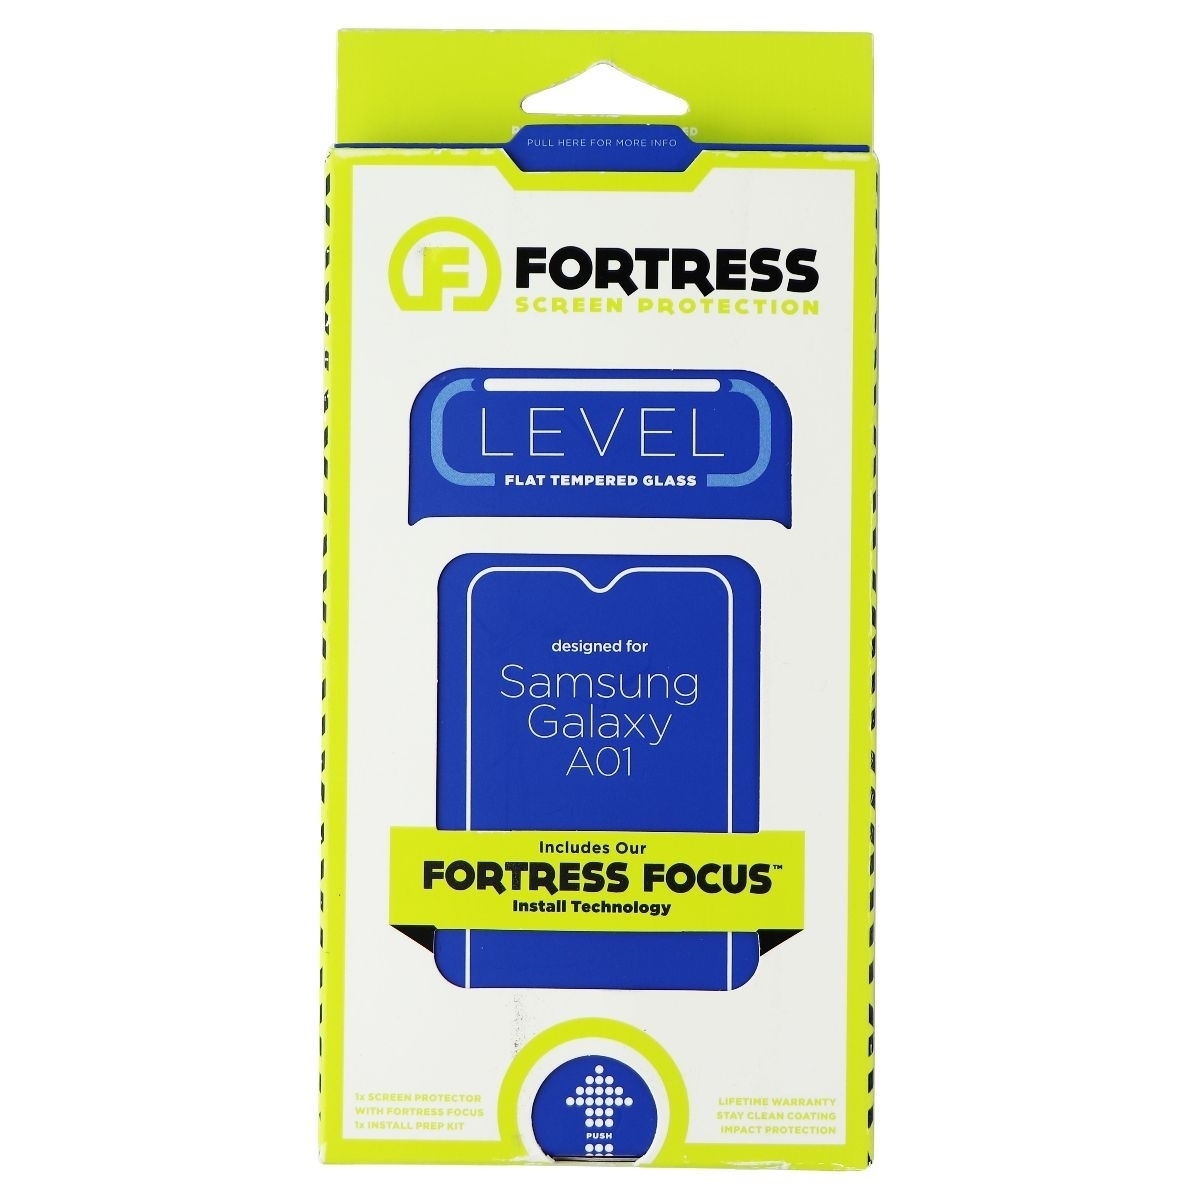 Fortress LEVEL Tempered Glass Screen Protector For Samsung Galaxy A01 - Clear